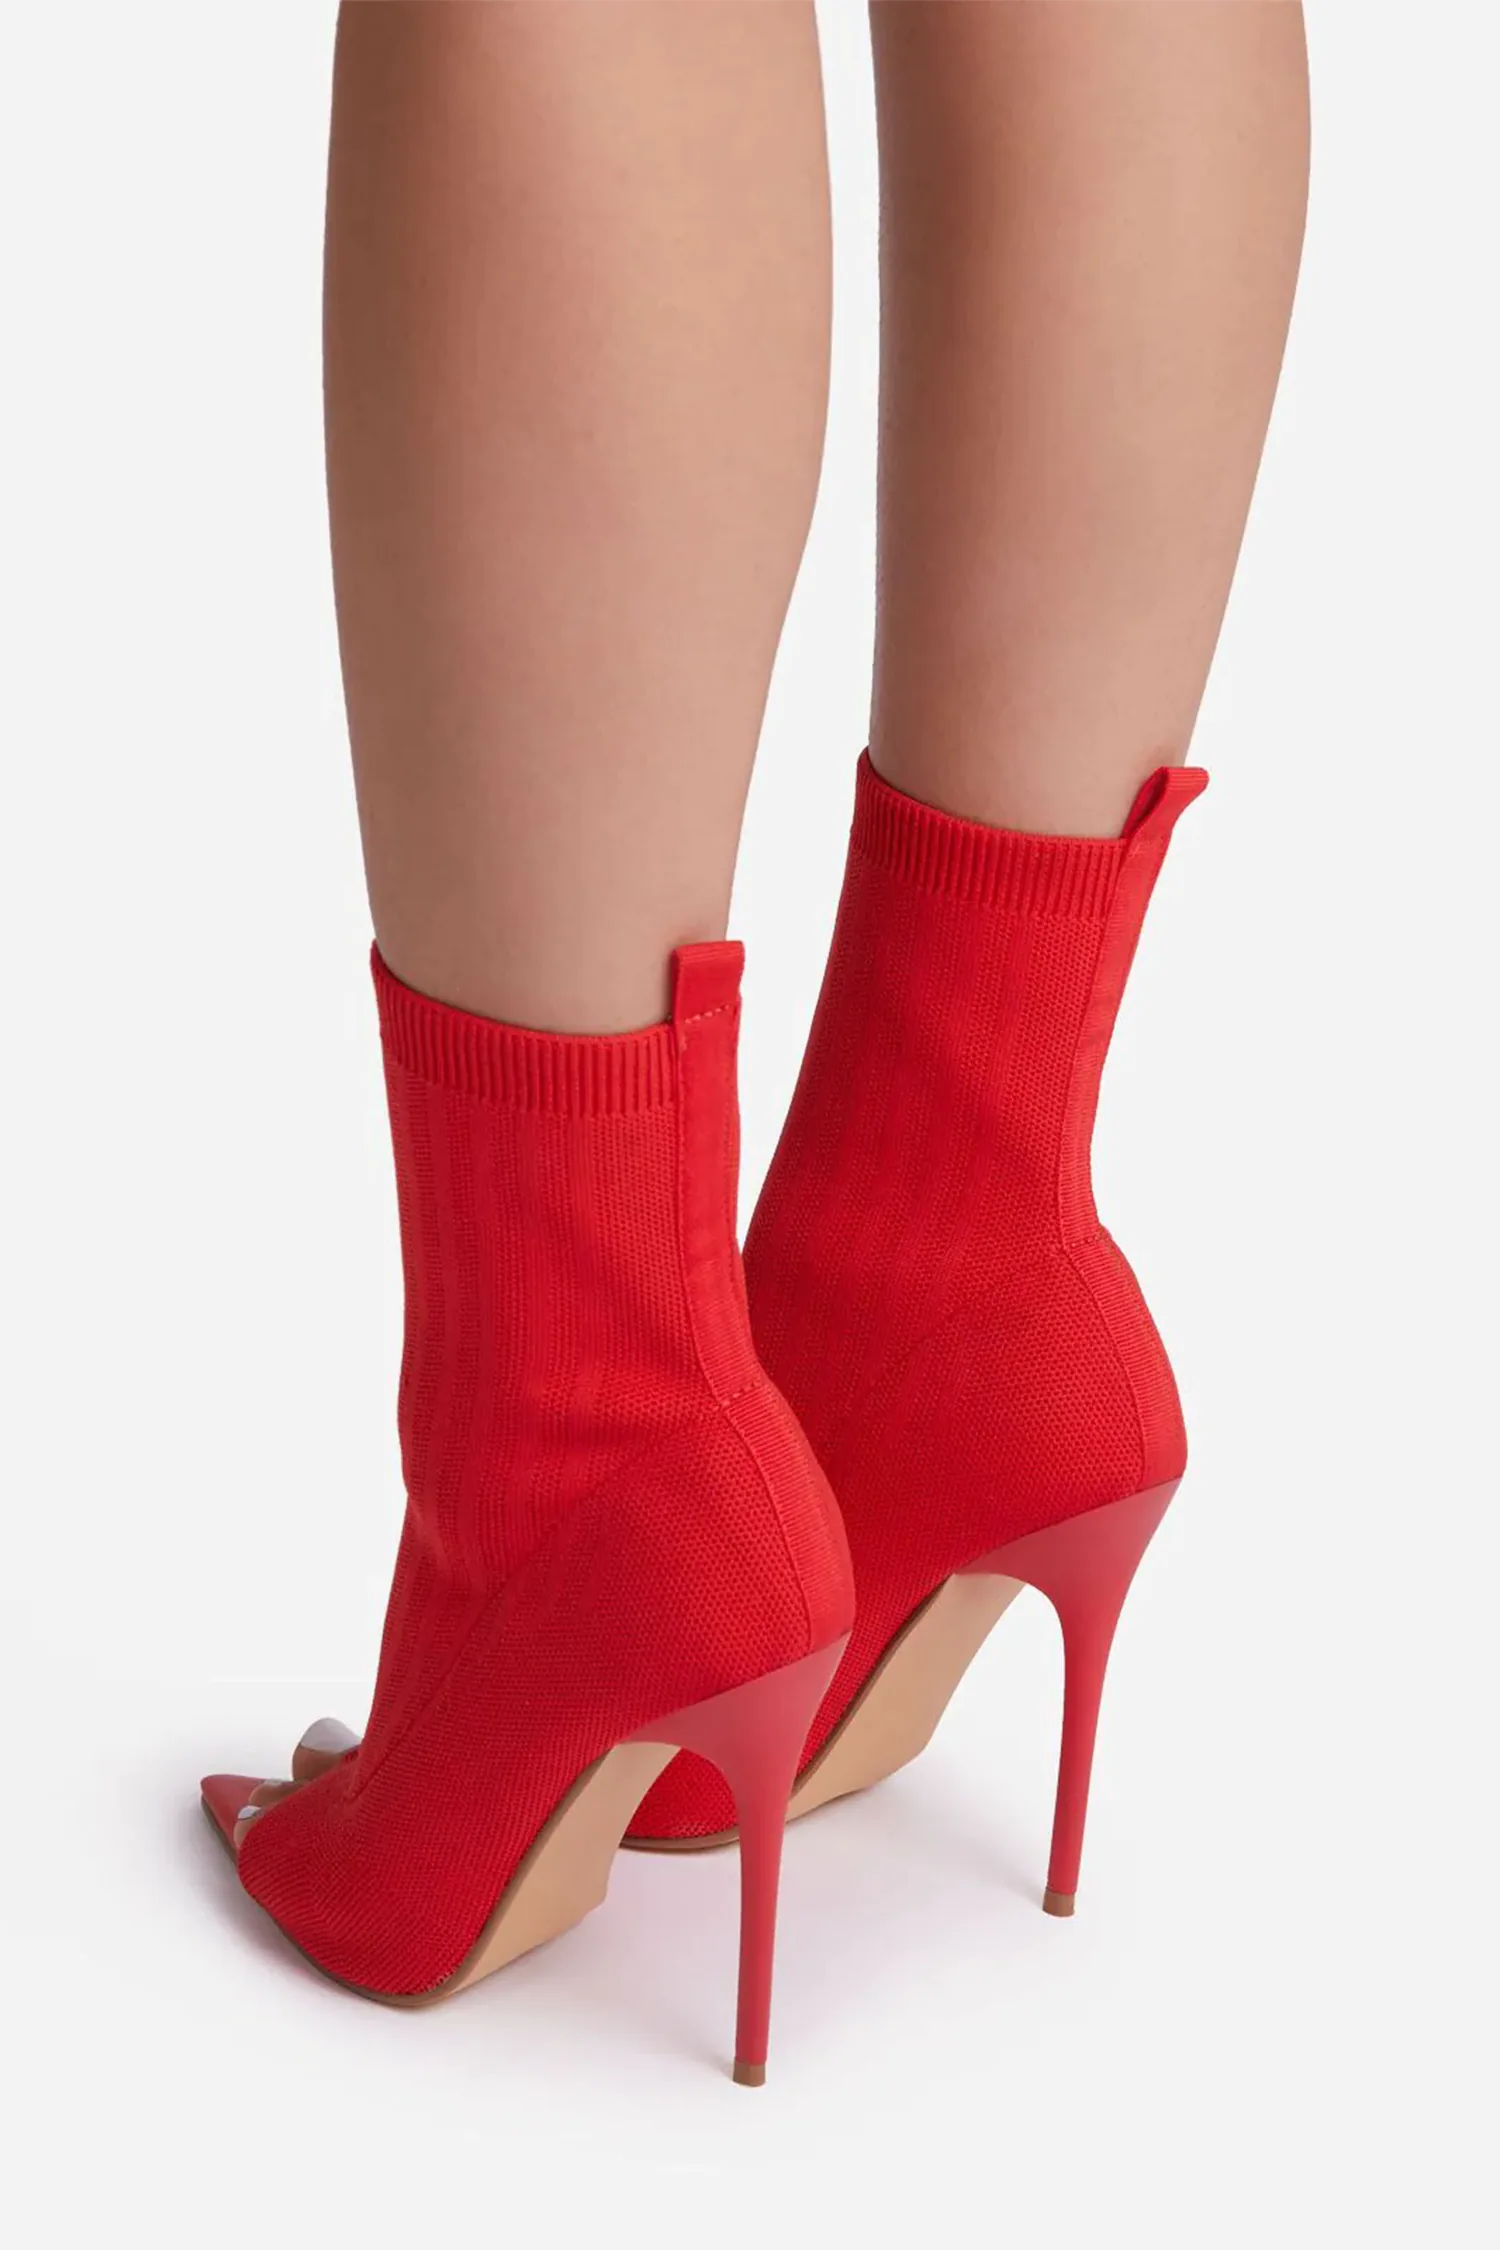 Red Pointed Peep Toe Stiletto Heels Ankle Sock Boots